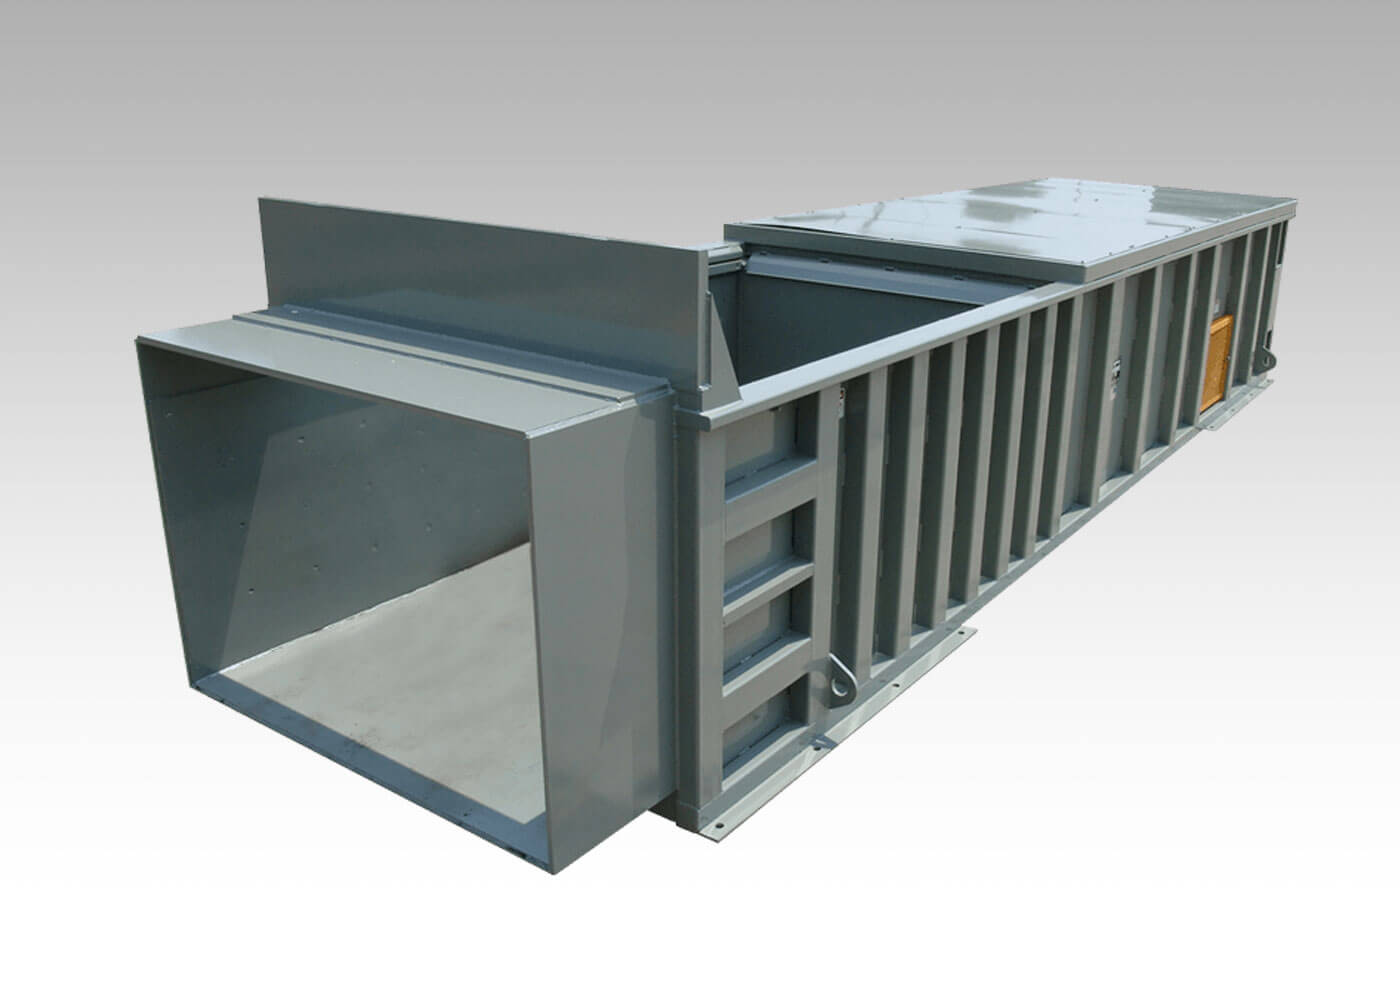 High capacity trash compactors and recycling compactors for waste transfer station applications